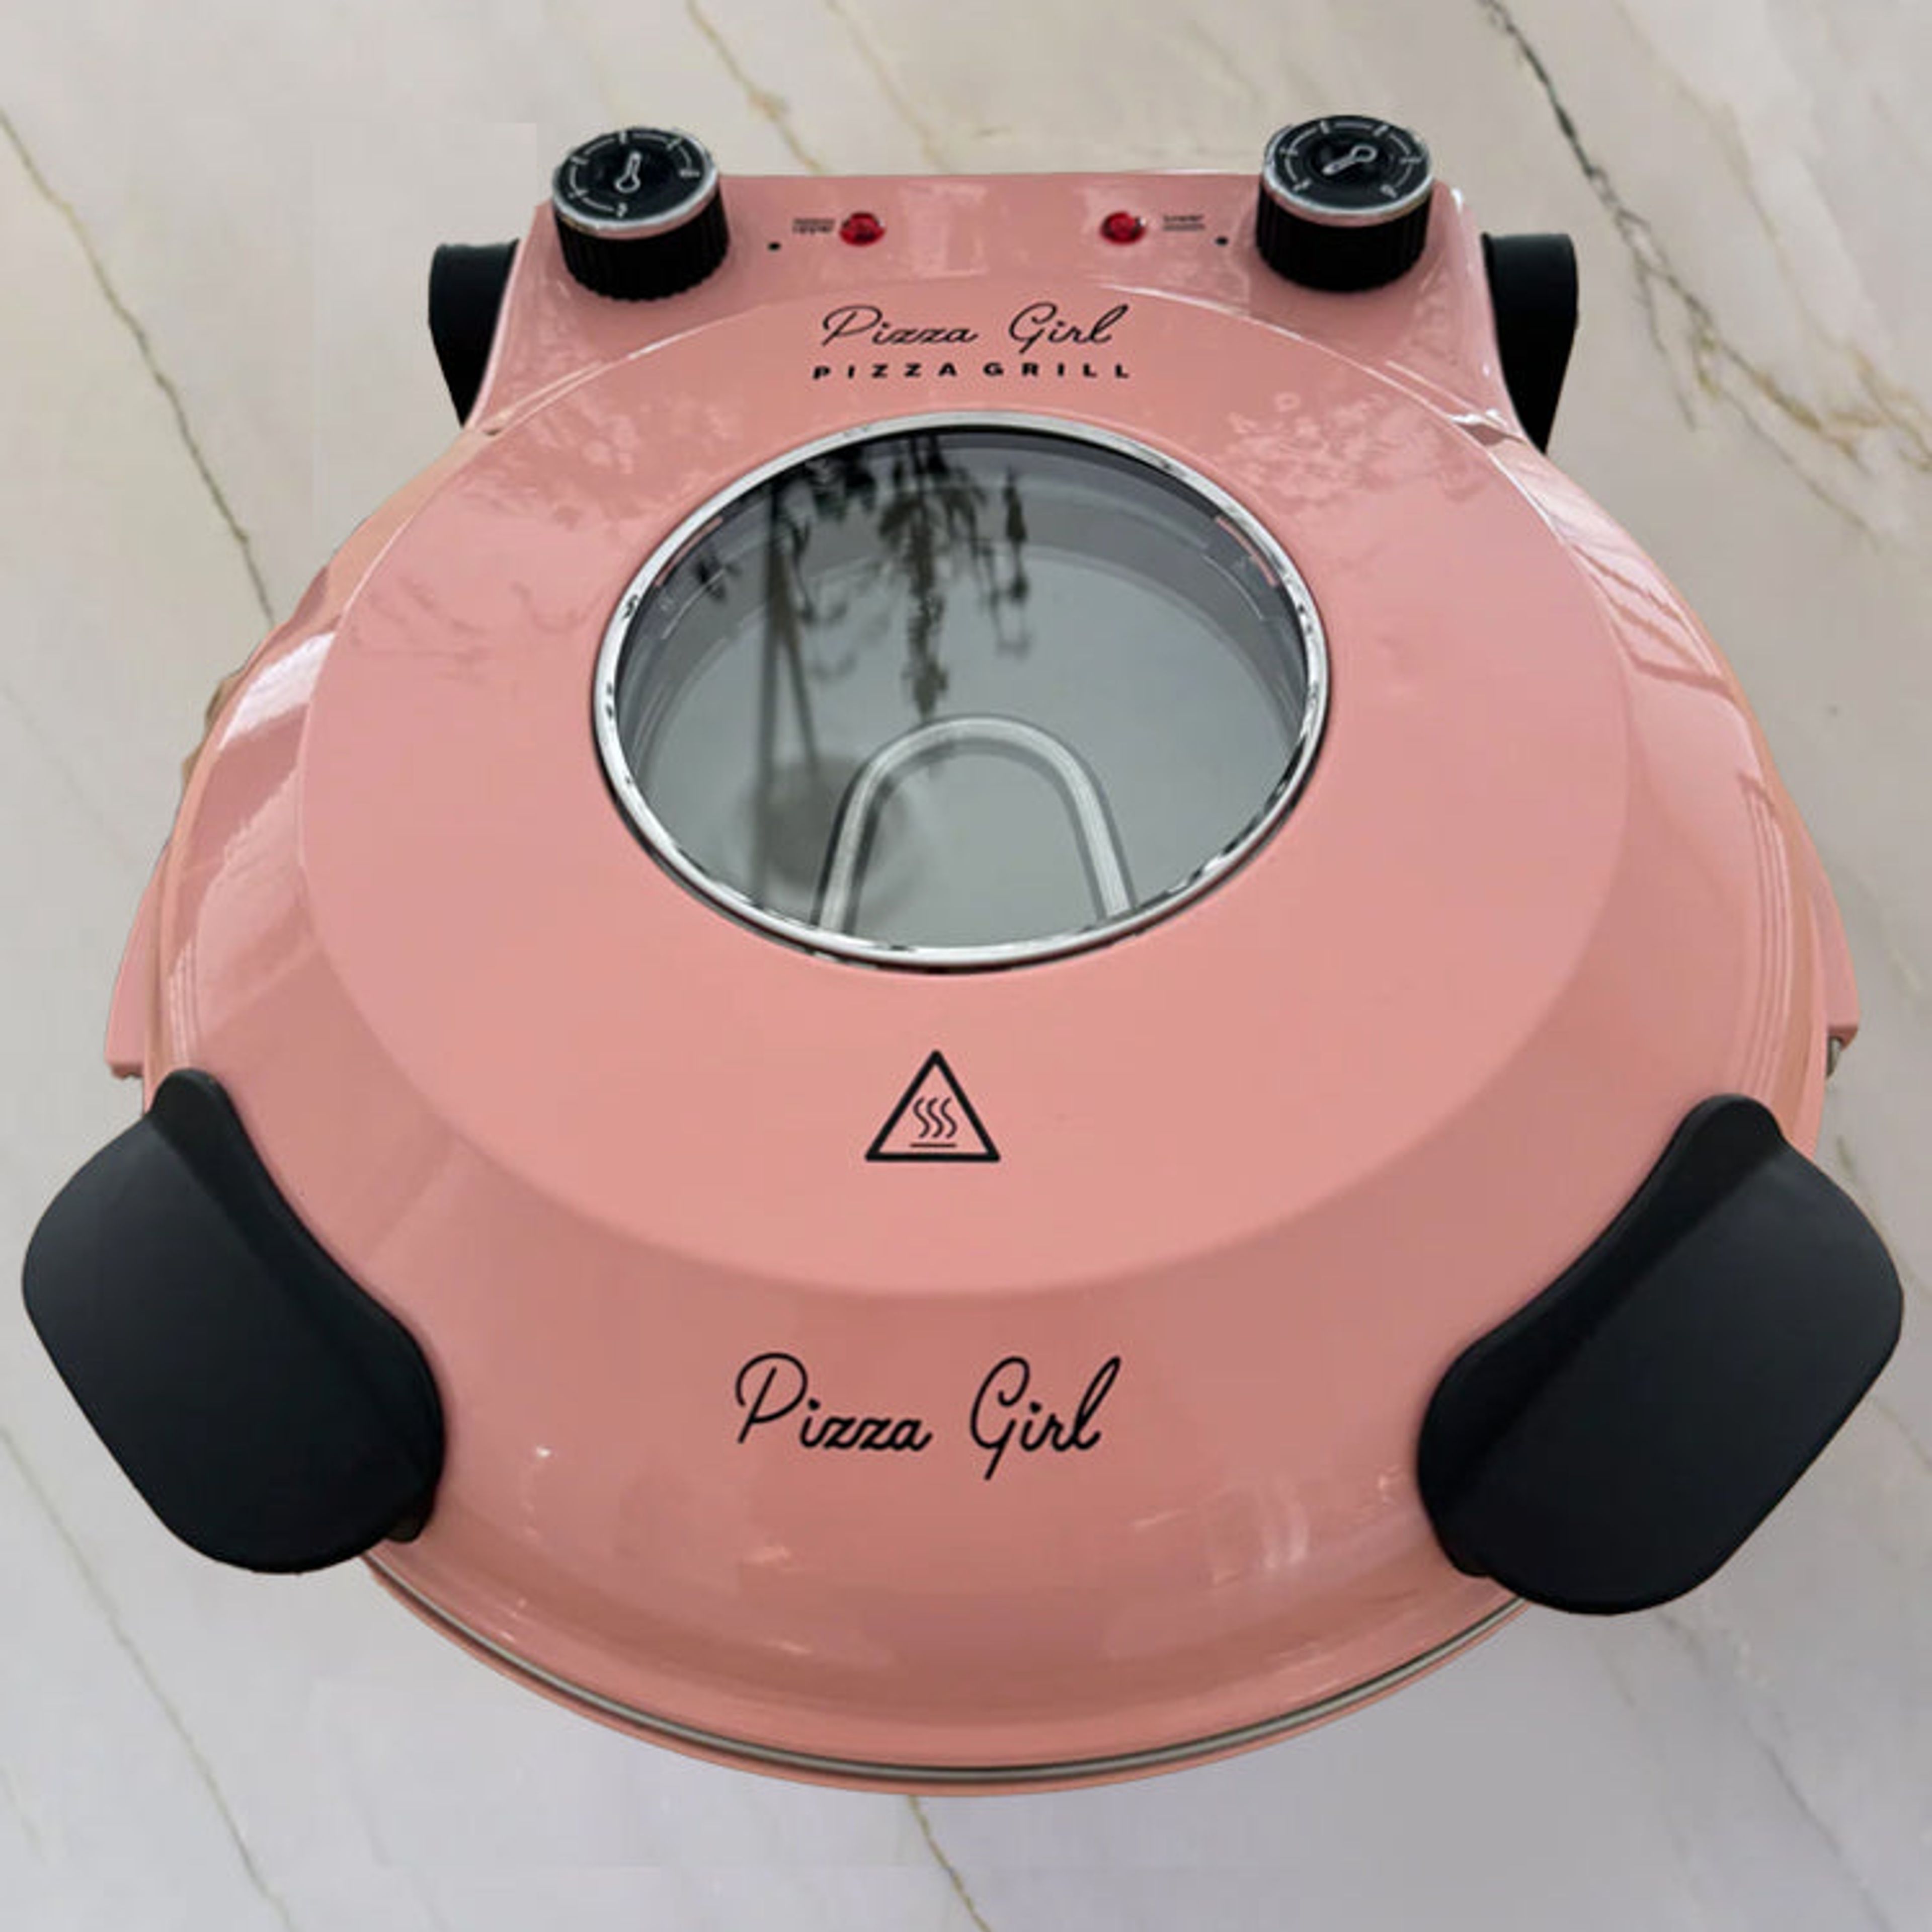 The Pizza Girl Pizza Grill - Pg Pink